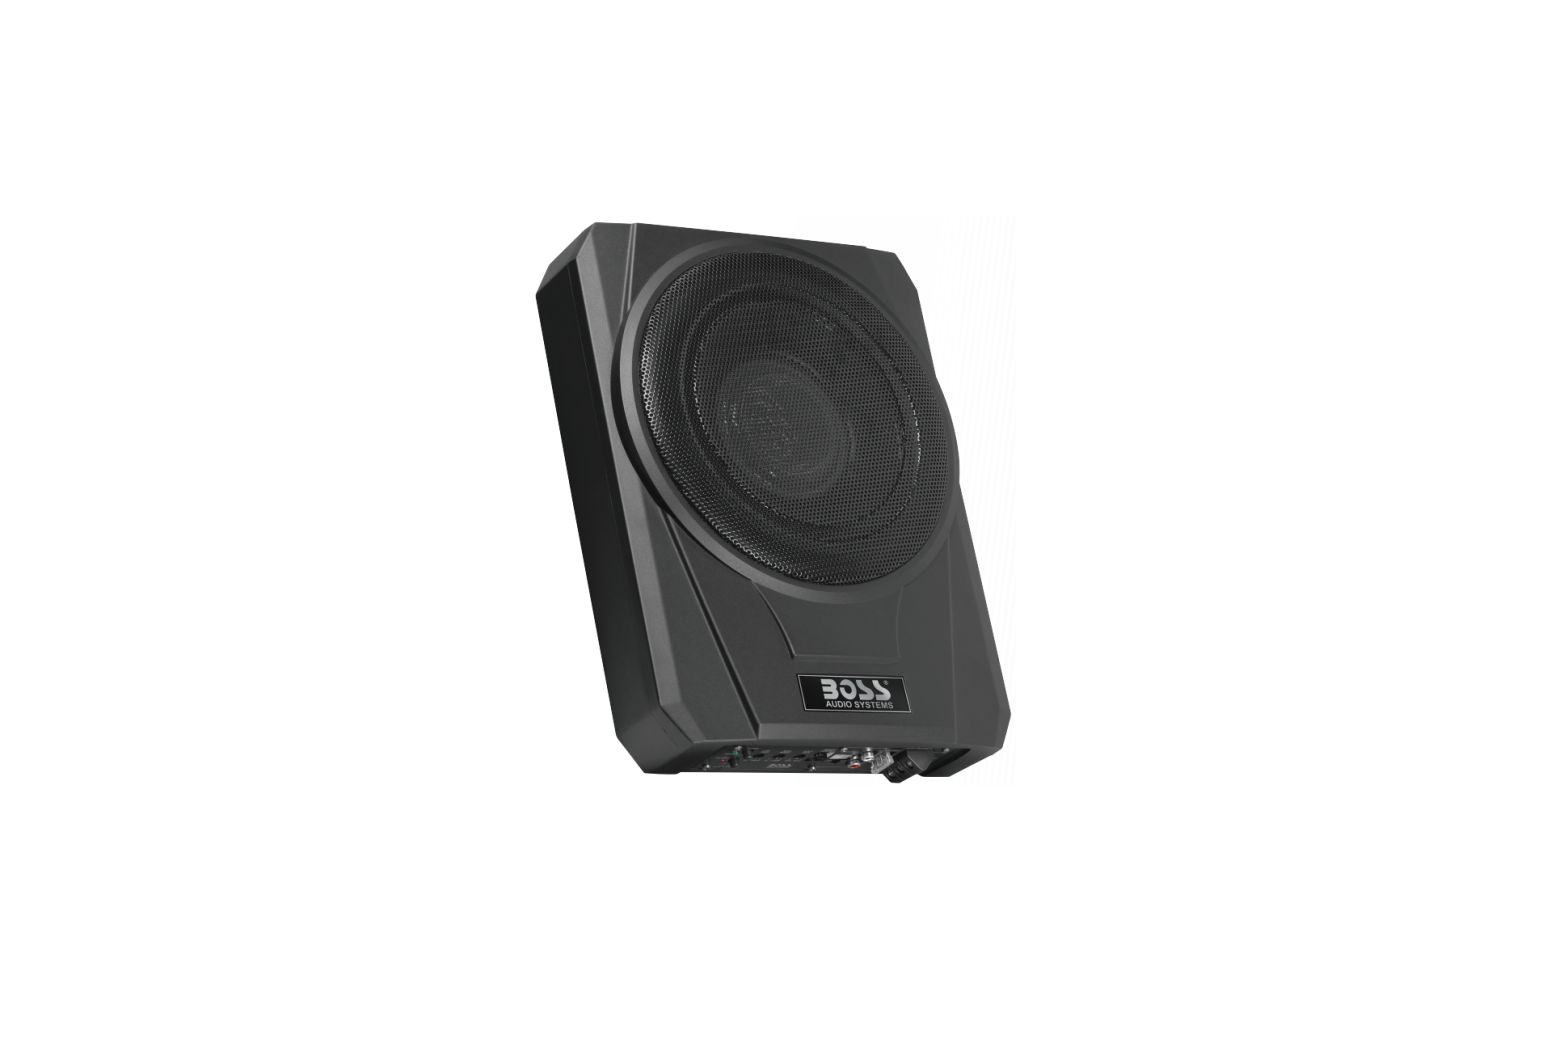 BOSS BASS10 Low Profile Amplified Subwoofer User Manual